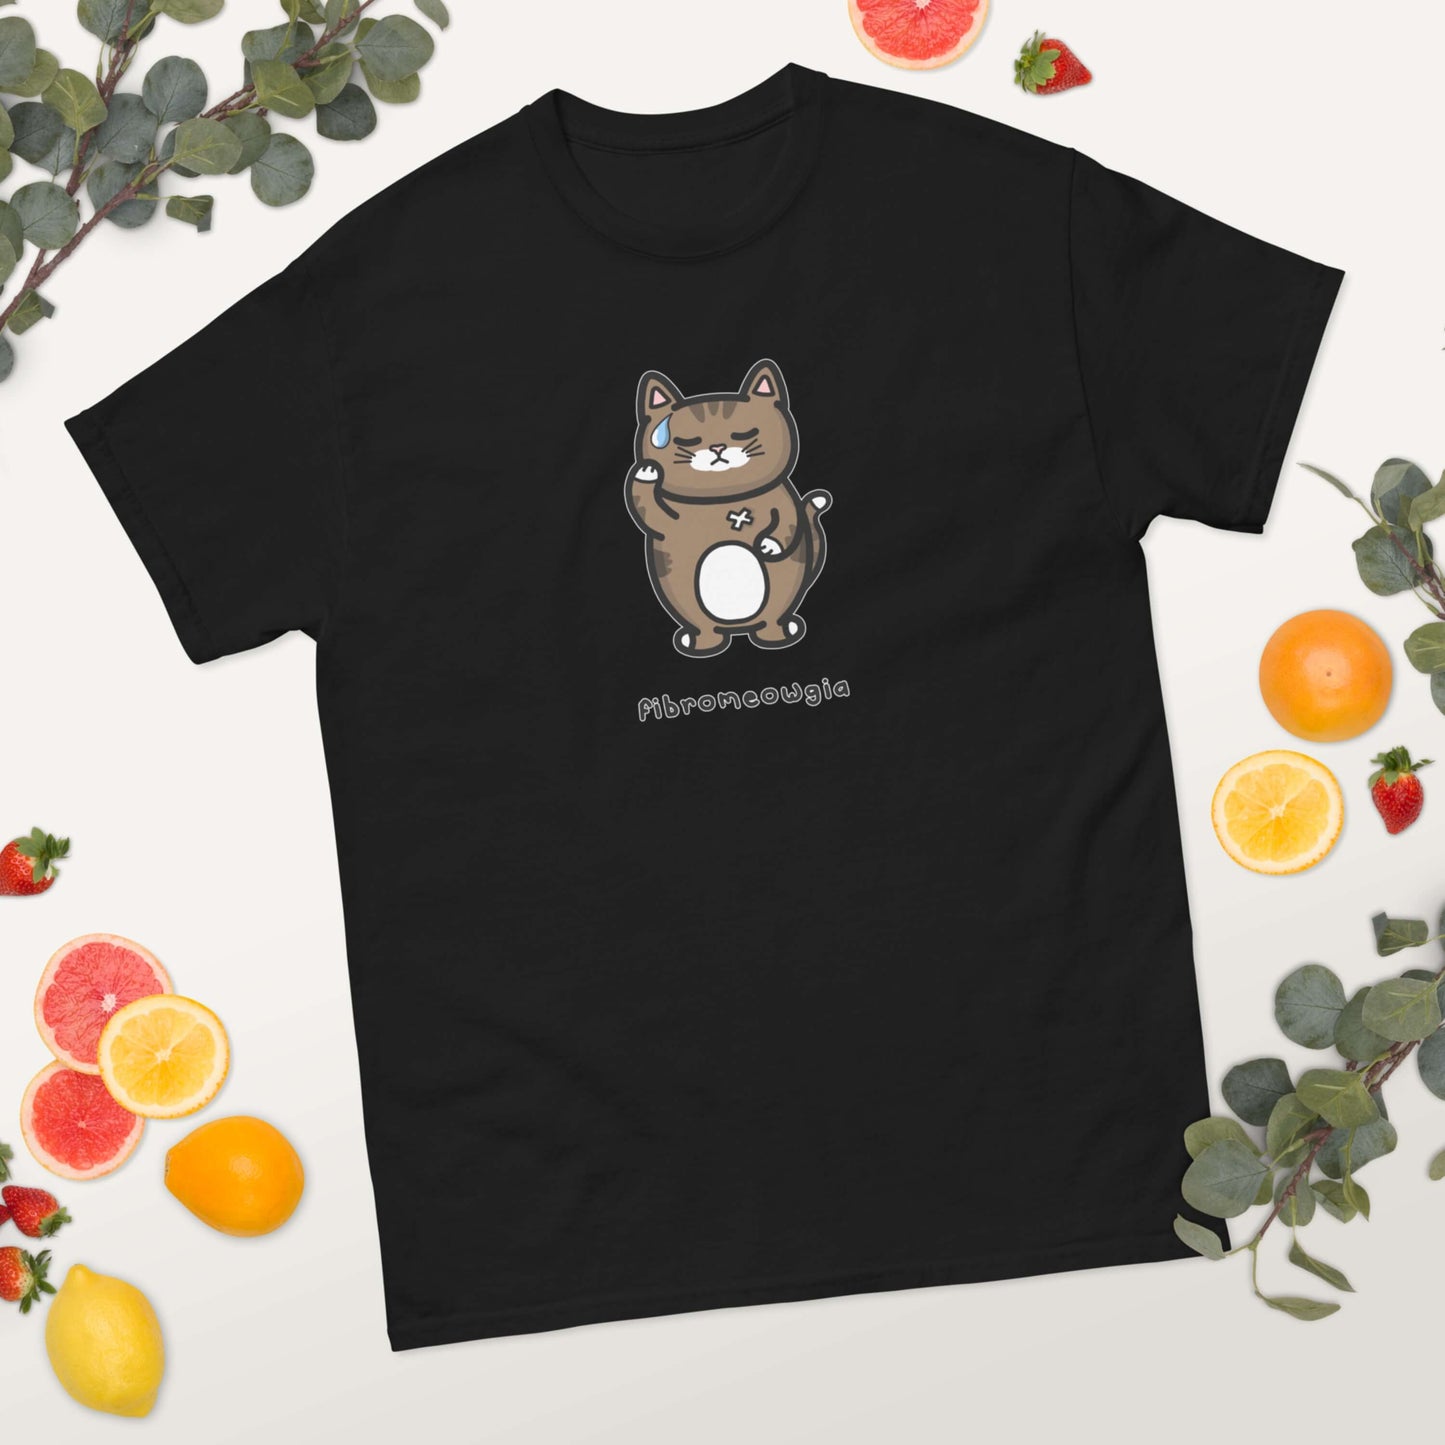 The Fibromeowgia Cat Tee - Fibromyalgia Syndrome laying on a white background with fruit slices and green foliage. The black short sleeve tshirt features a sad brown tabby cat with a sweat droplet clutching its body with a white bandaid and bottom text reading 'fibromeowgia'. The hand drawn design is raising awareness for fibro fibromyalgia syndrome.